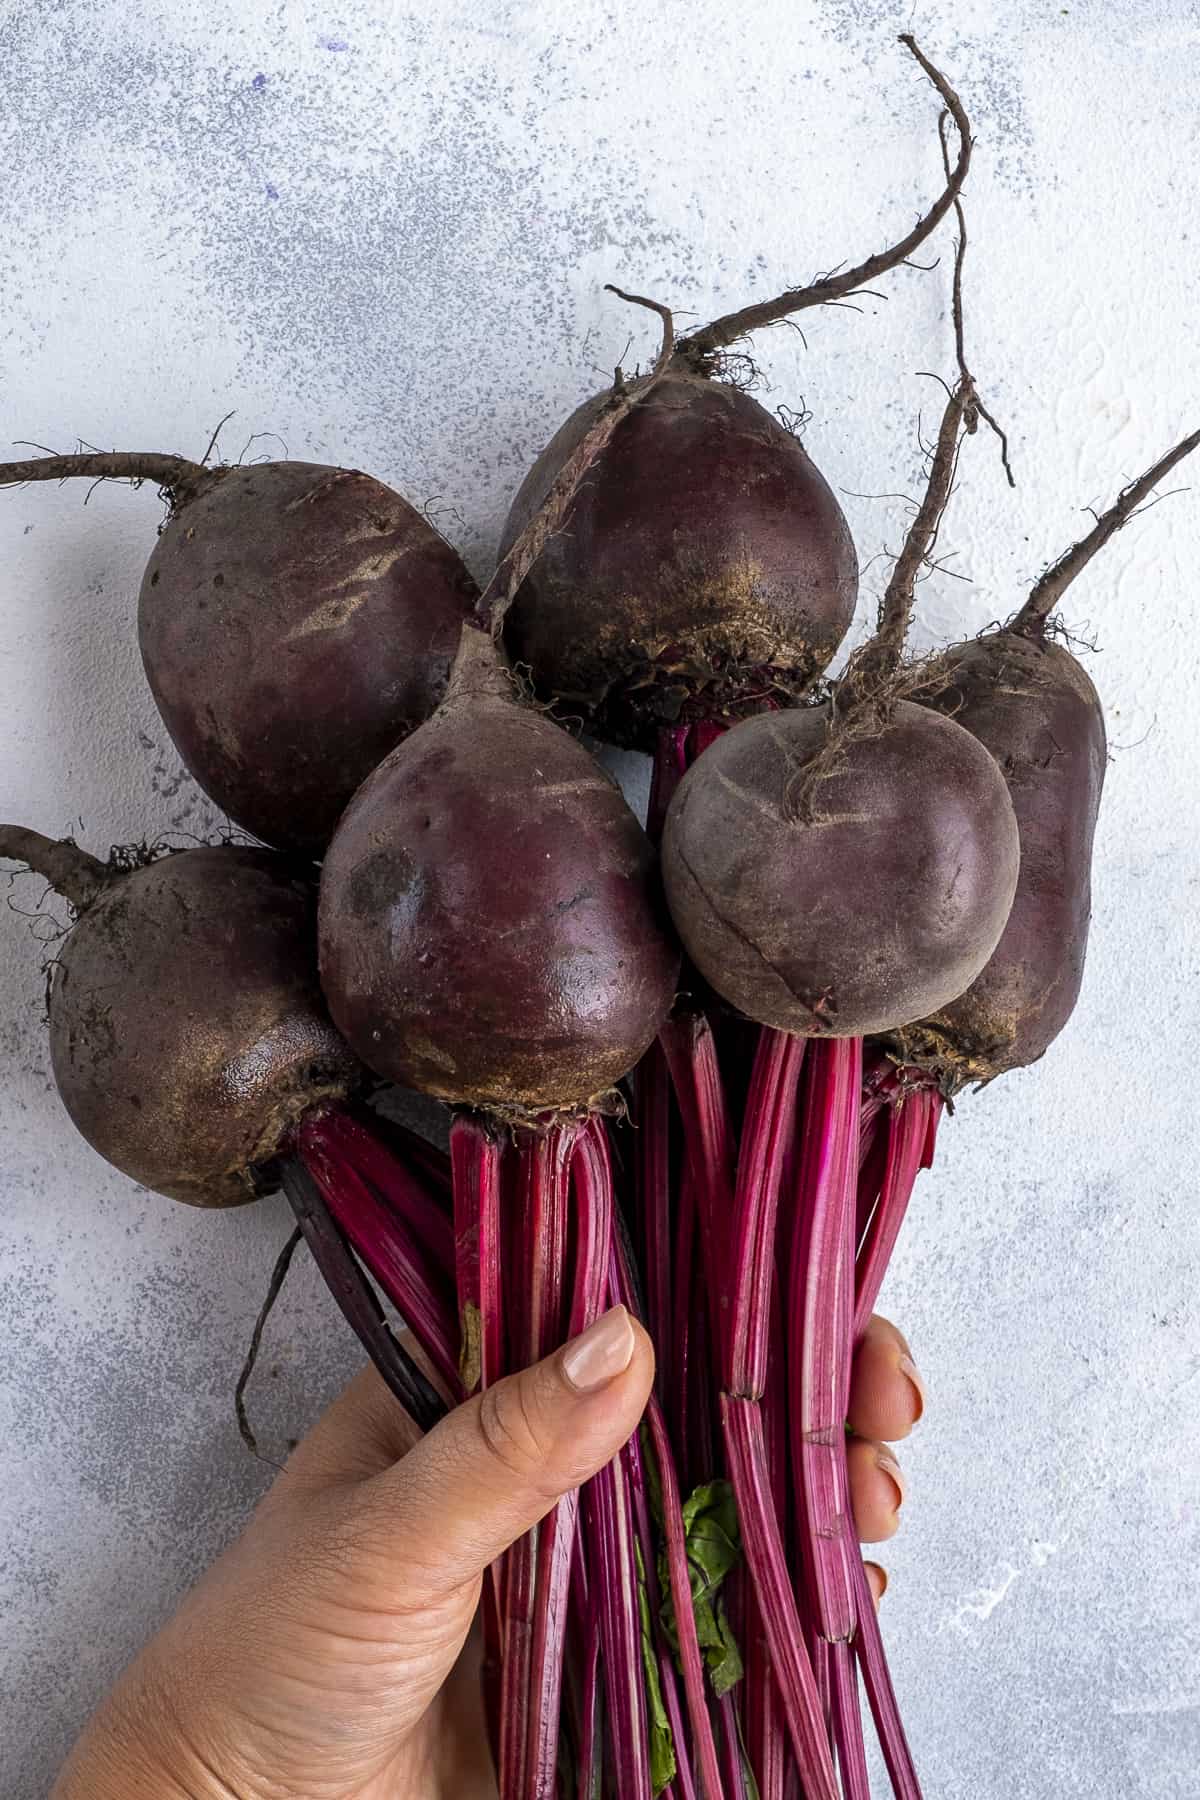 A hand holding raw beets from their stems.